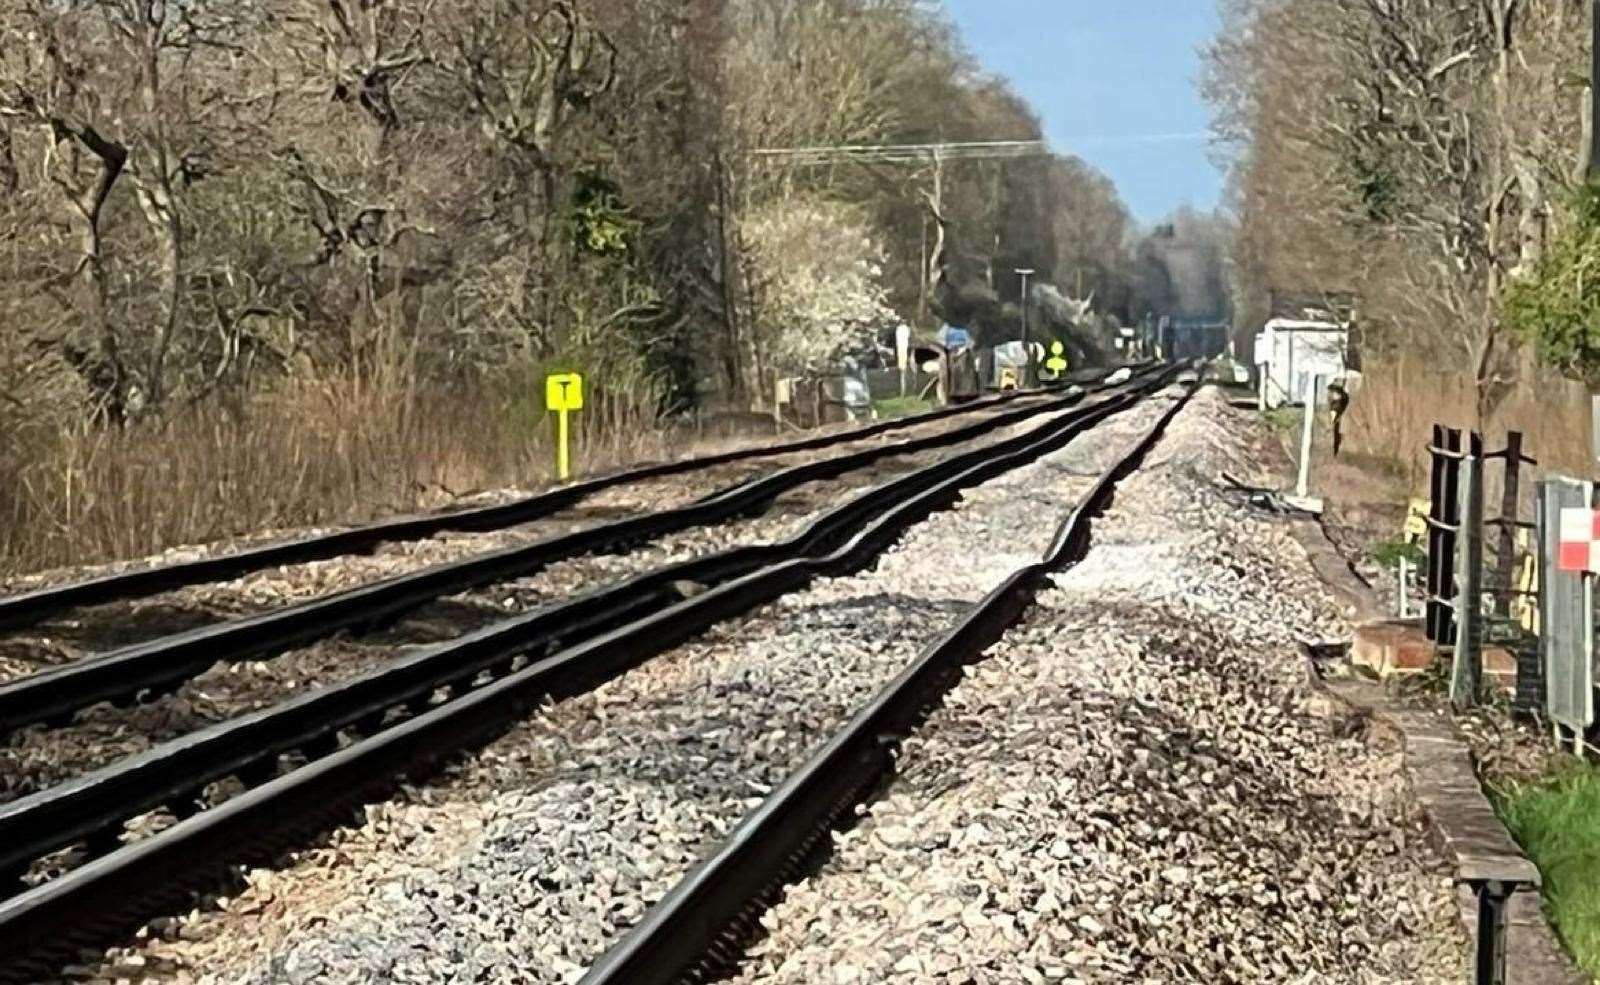 The track between Tonbridge and Edenbridge was closed for two weeks. Picture: @NetworkRailSE